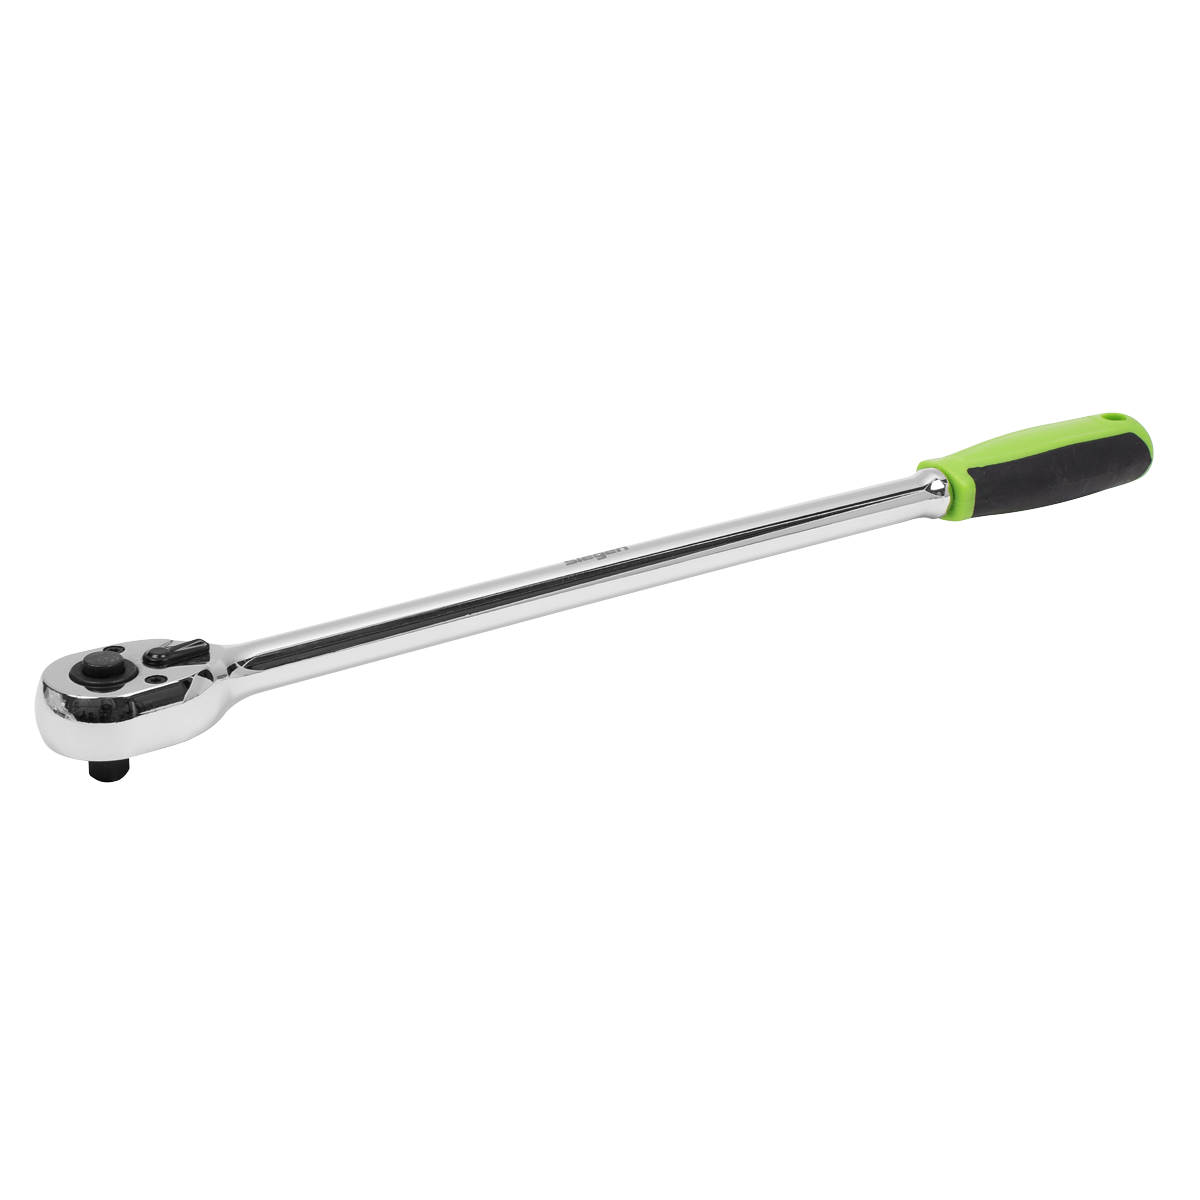 Sealey soft grip  1/4"Sq Drive Extra-Long Ratchet Wrench S01256